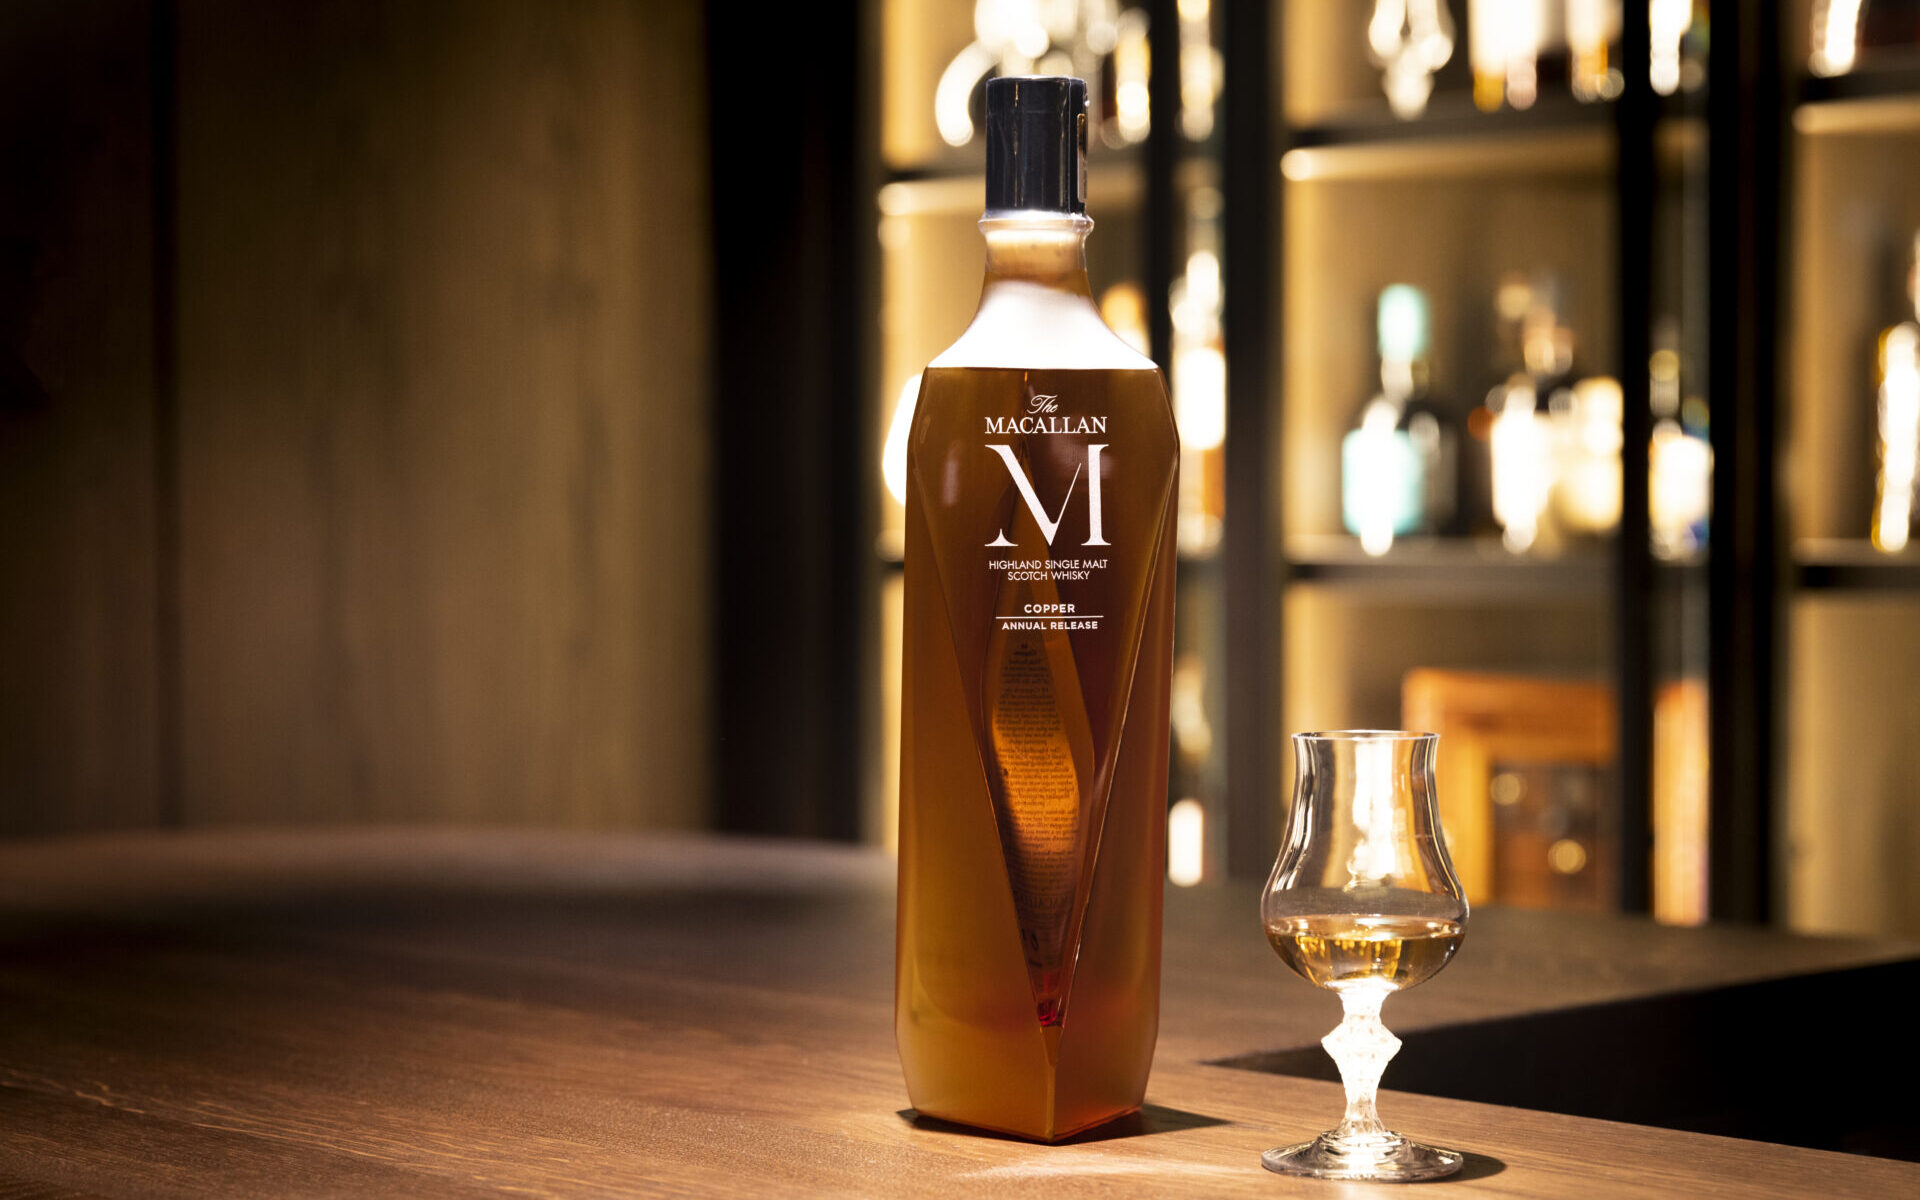 The Macallan whisky